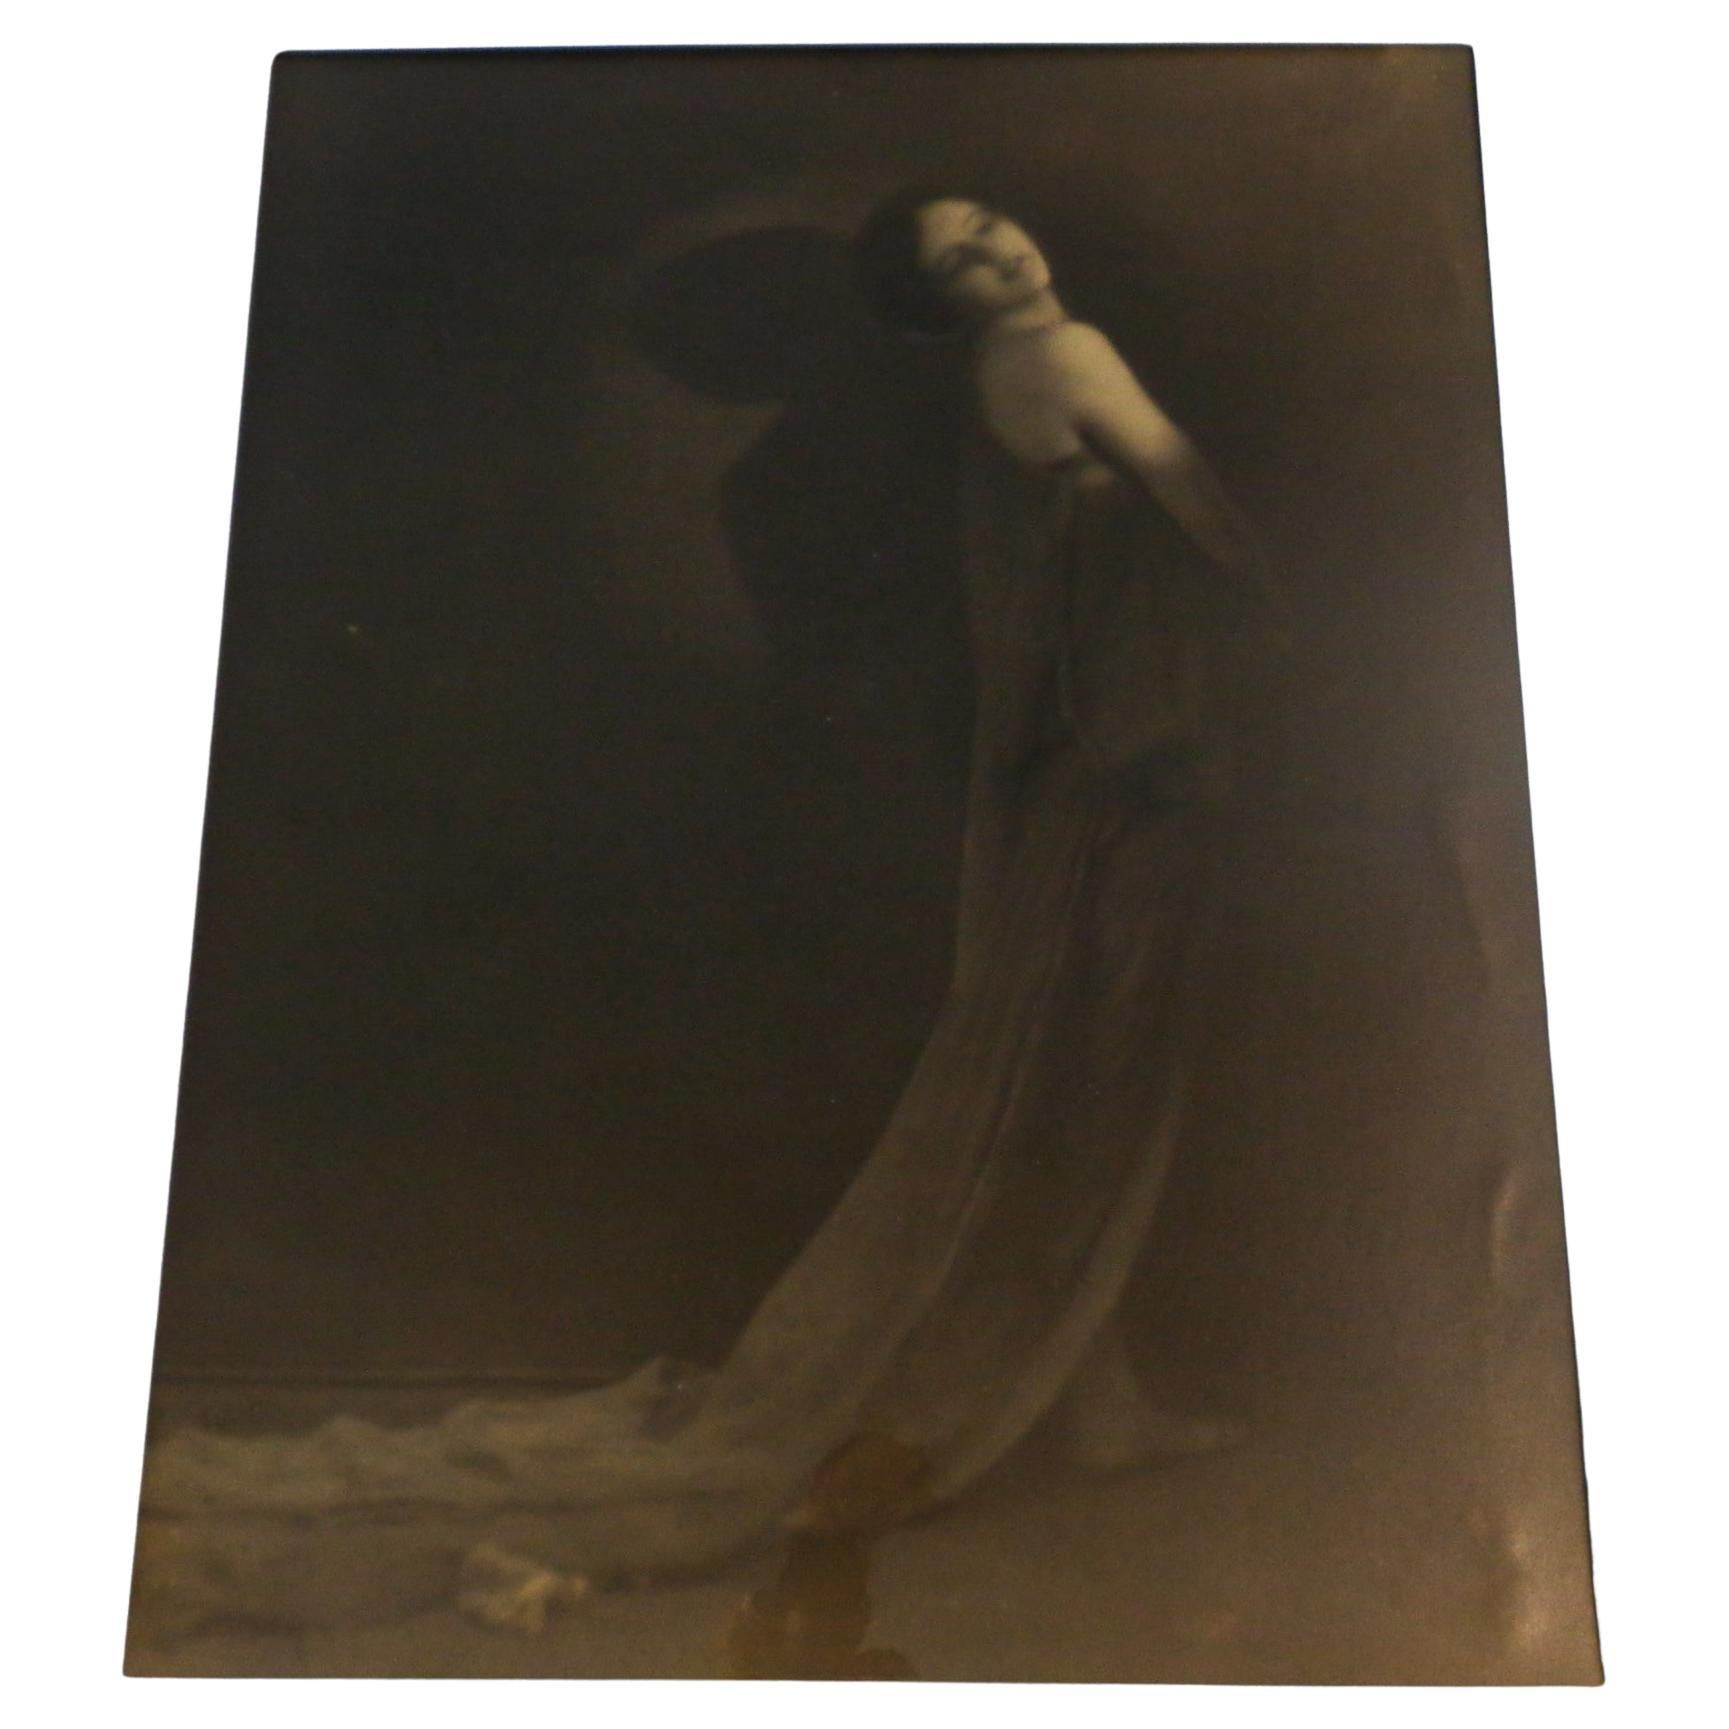 Early Pictorialist Sepia Tone Gelatin Silver Print Photograph Sultry Woman In Good Condition For Sale In Rochester, NY